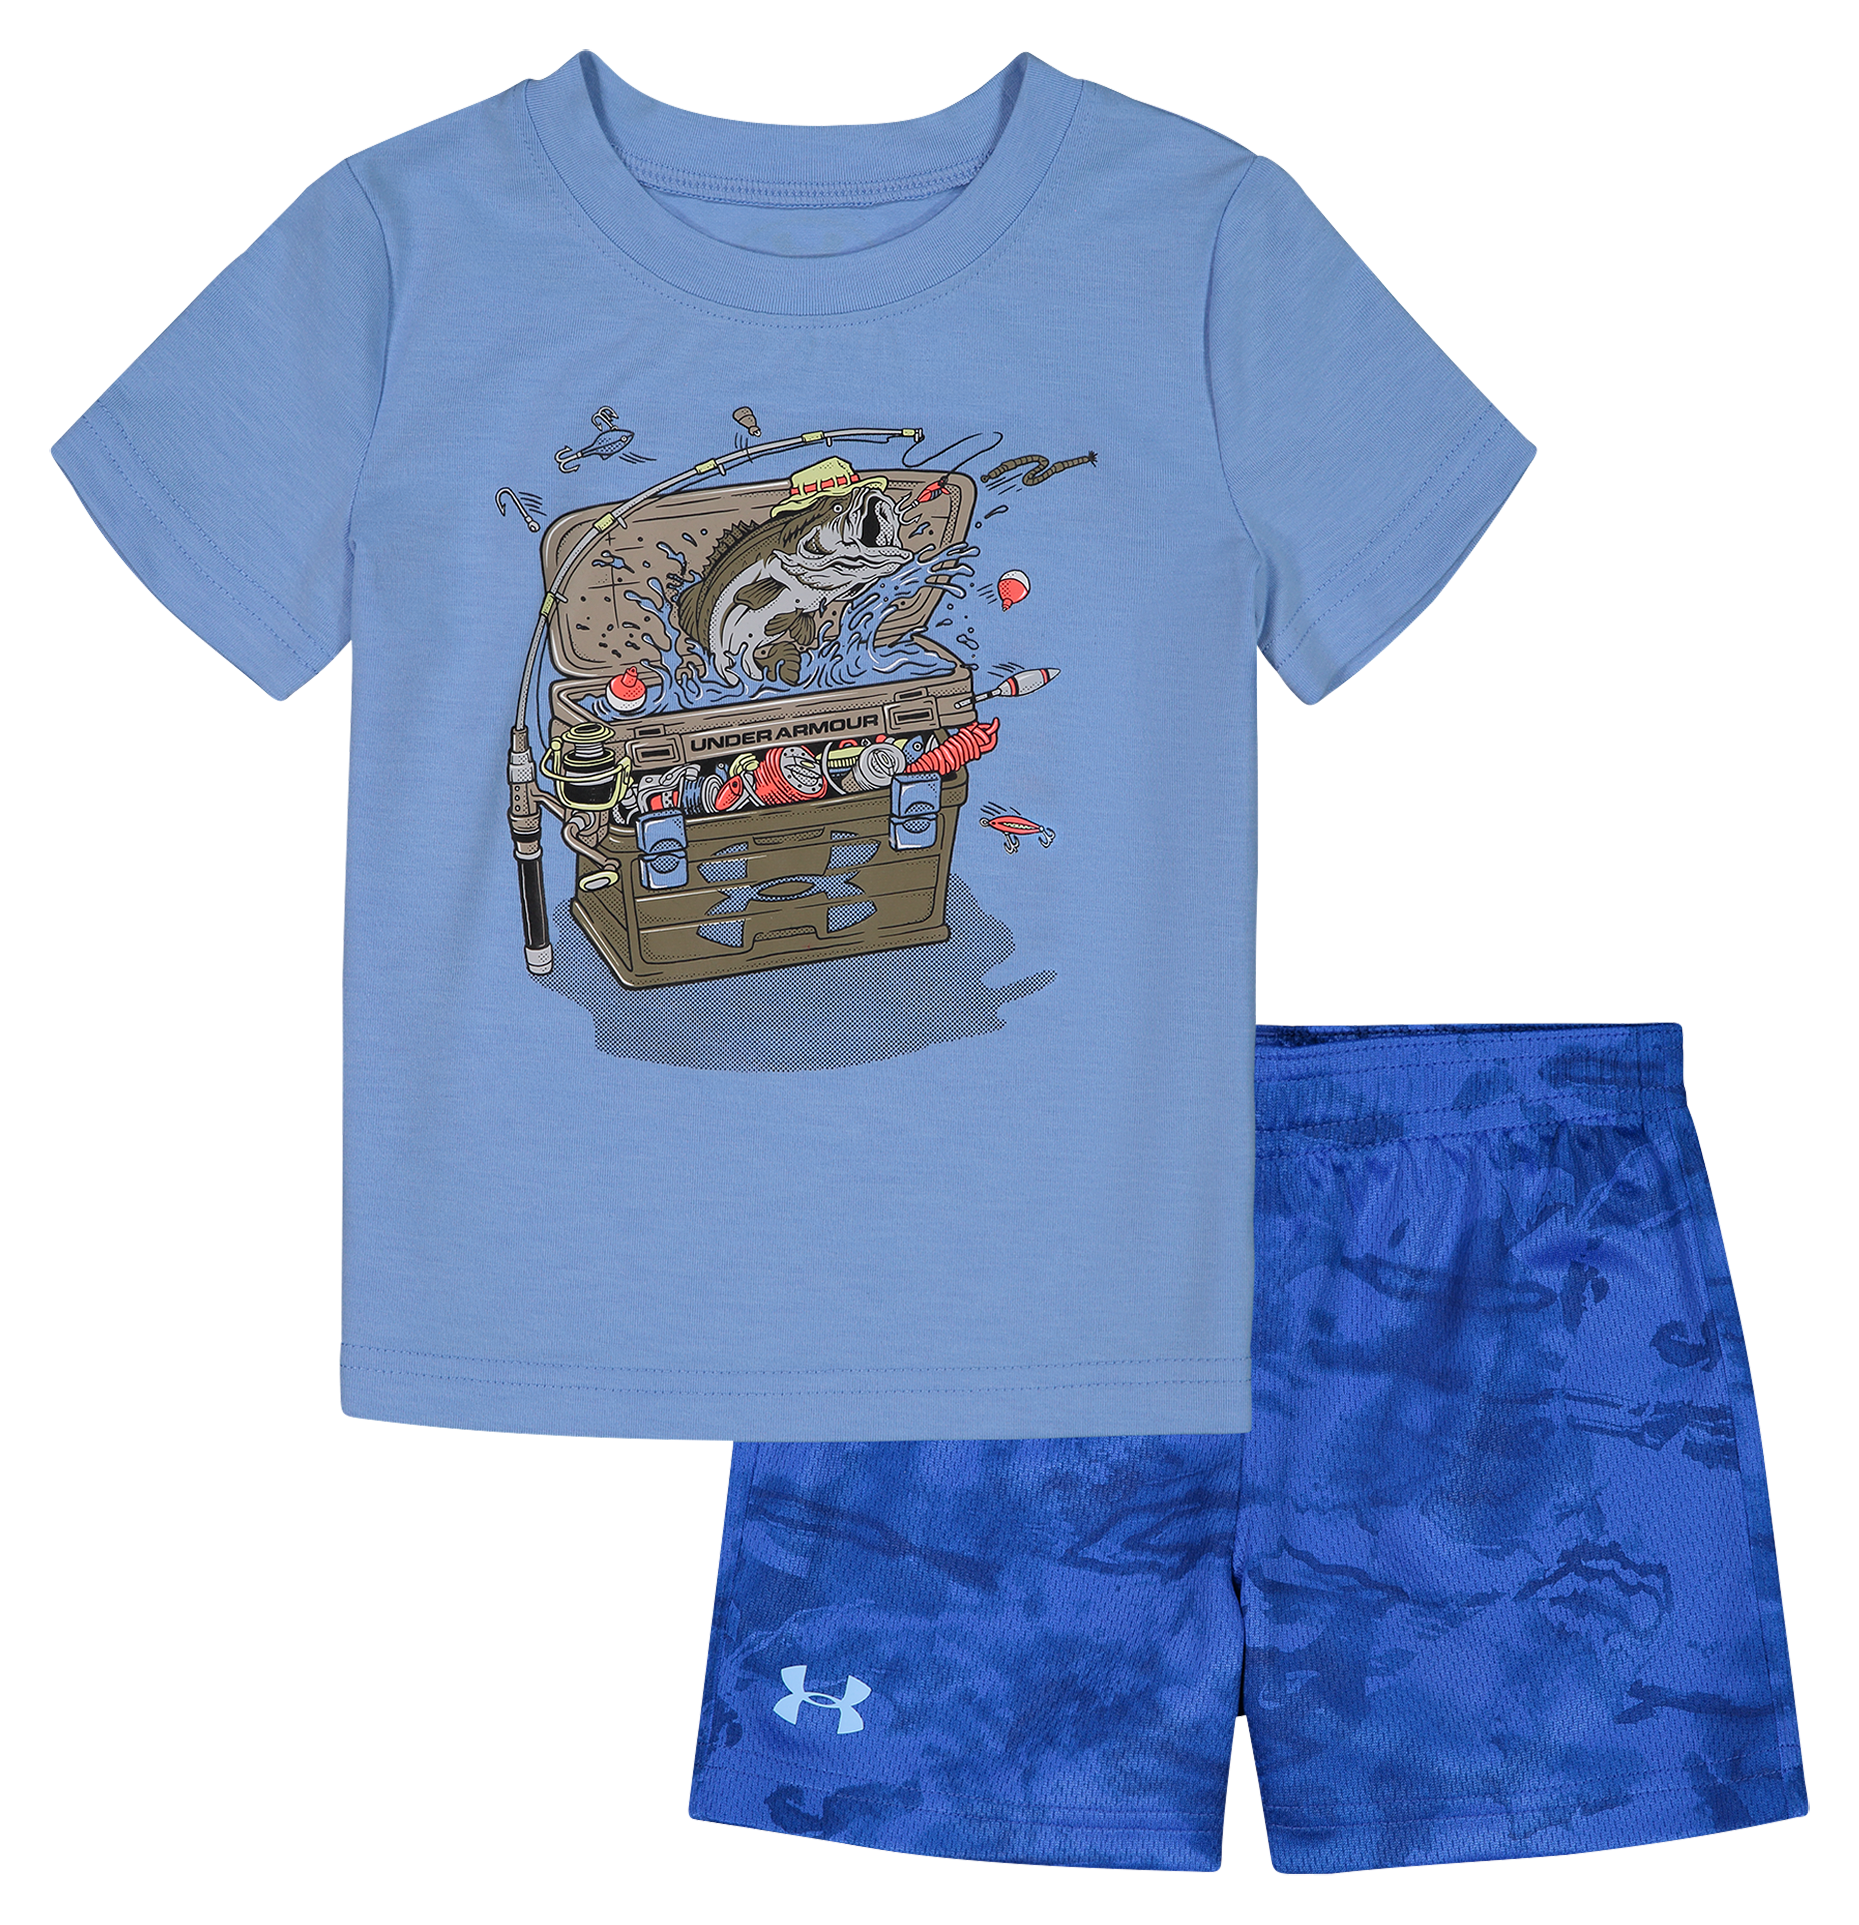 Under Armour Tackle Box Short-Sleeve T-Shirt and Shorts Set for